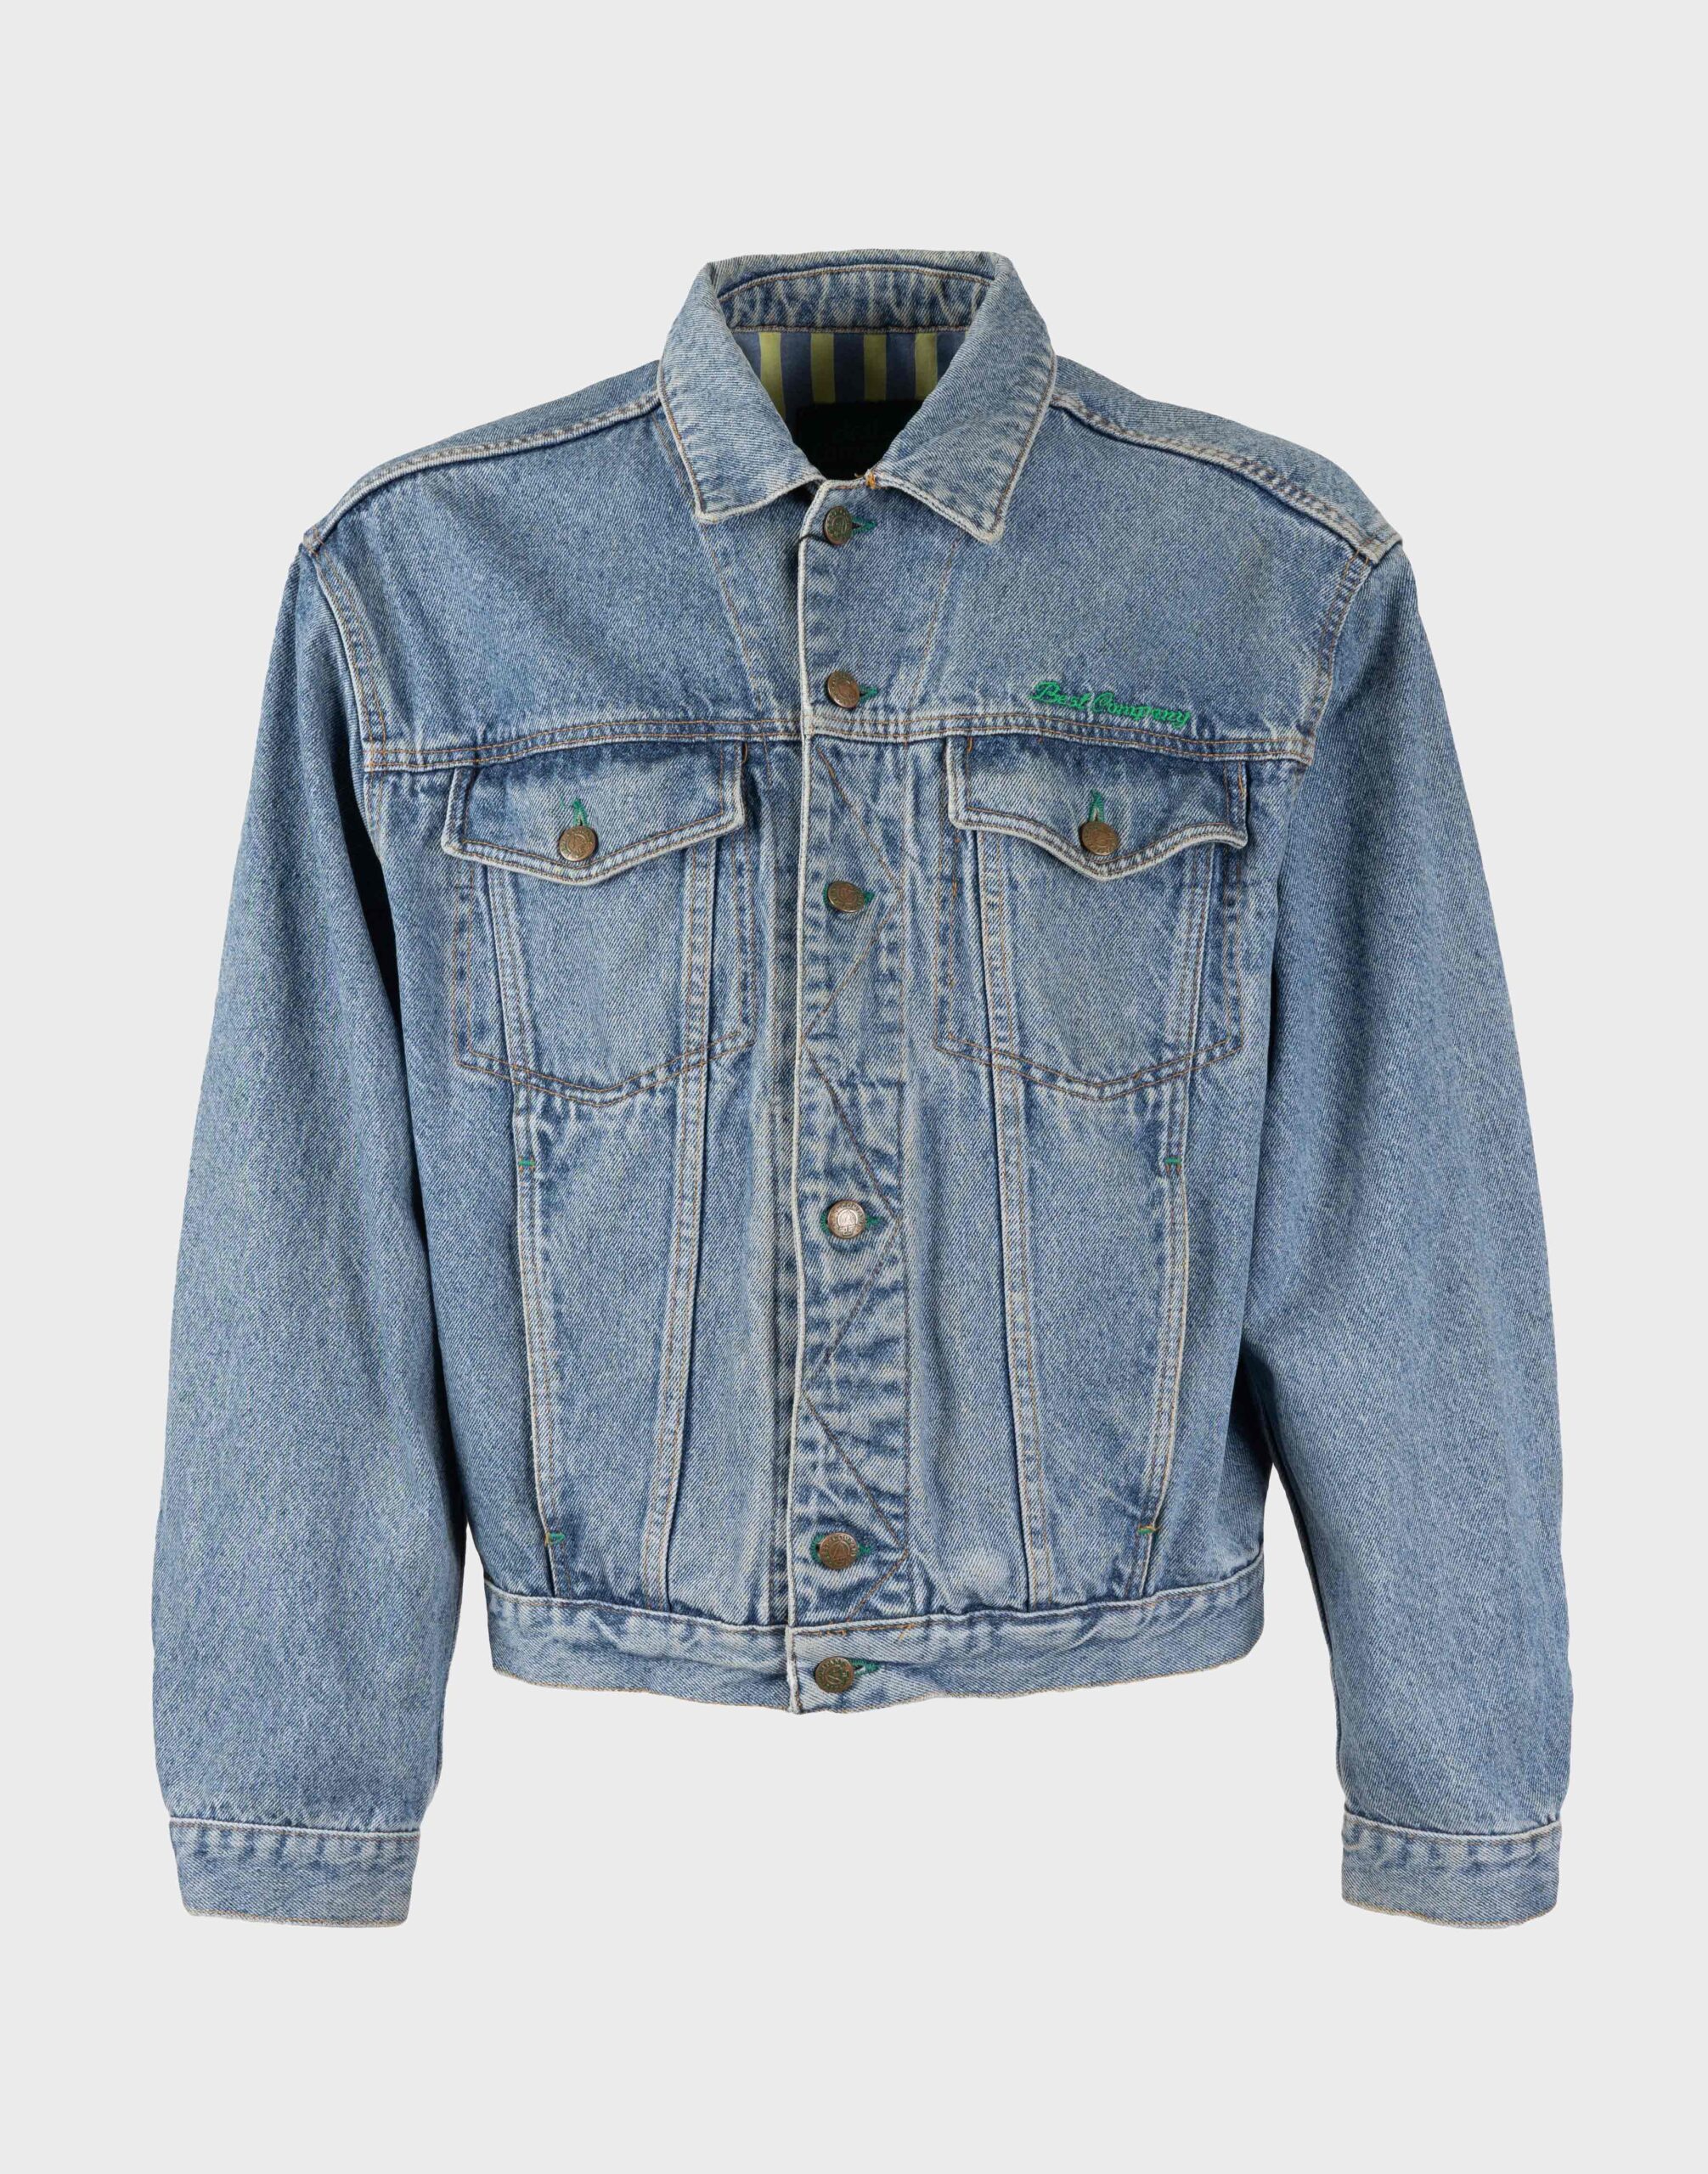 Men's light wash denim jacket with metal buttons on the front